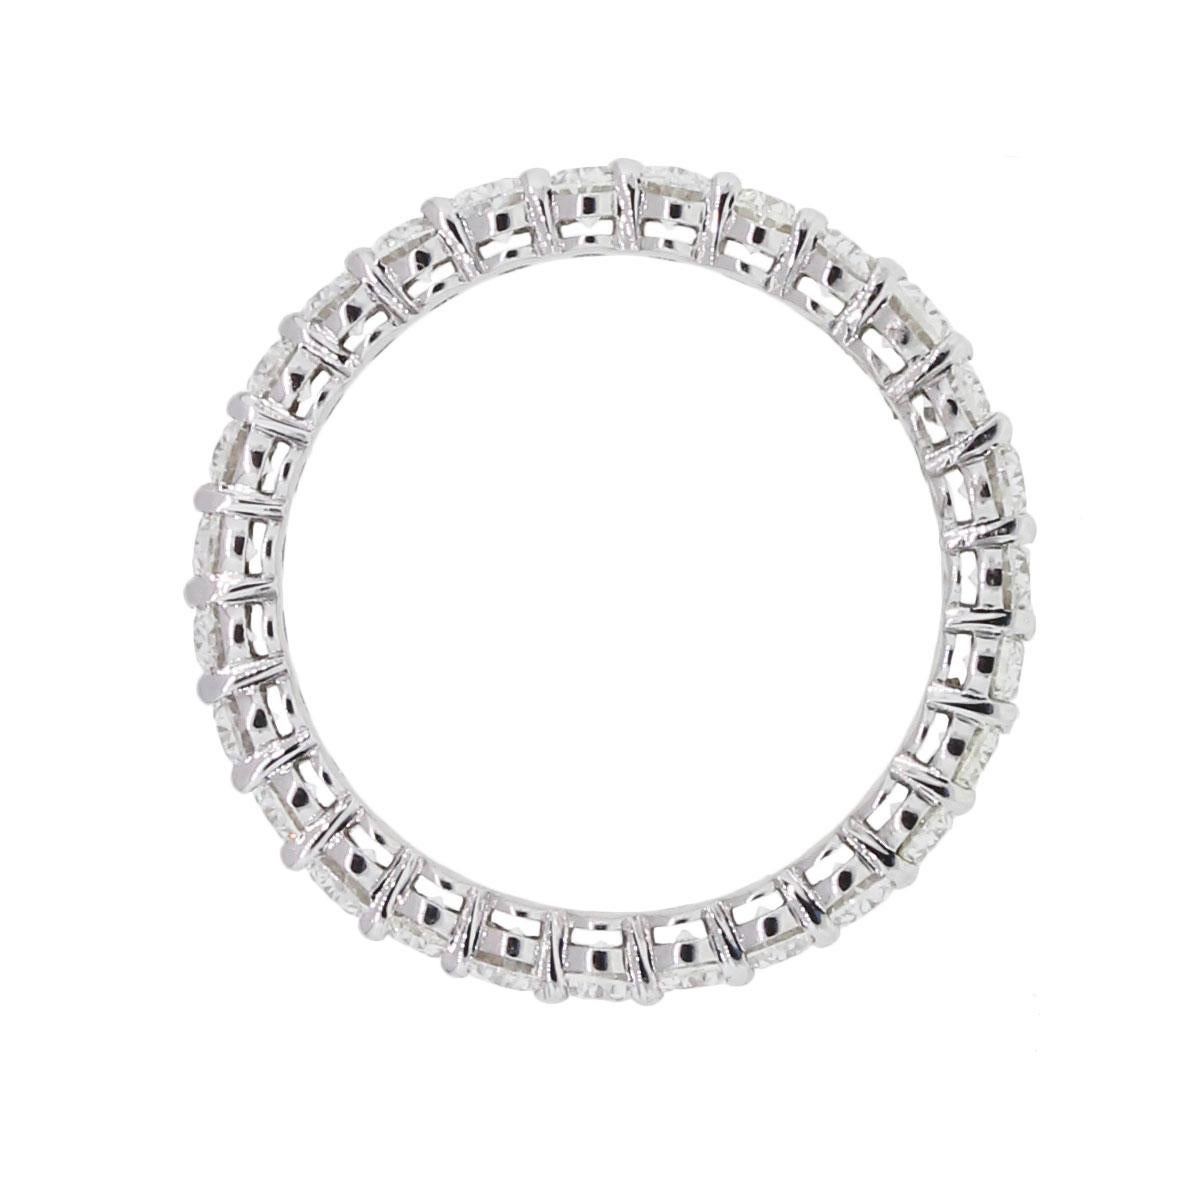 Material: 14k white gold
Diamond Details: Approximately 2.03ctw of oval cut diamonds. Diamonds are G in color and VS in clarity.
Measurements: 0.84″ x 0.12″ x 0.84″
Ring Size: 6
Item Weight: 2g (1.3dwt)
Additional Details: This item comes with a